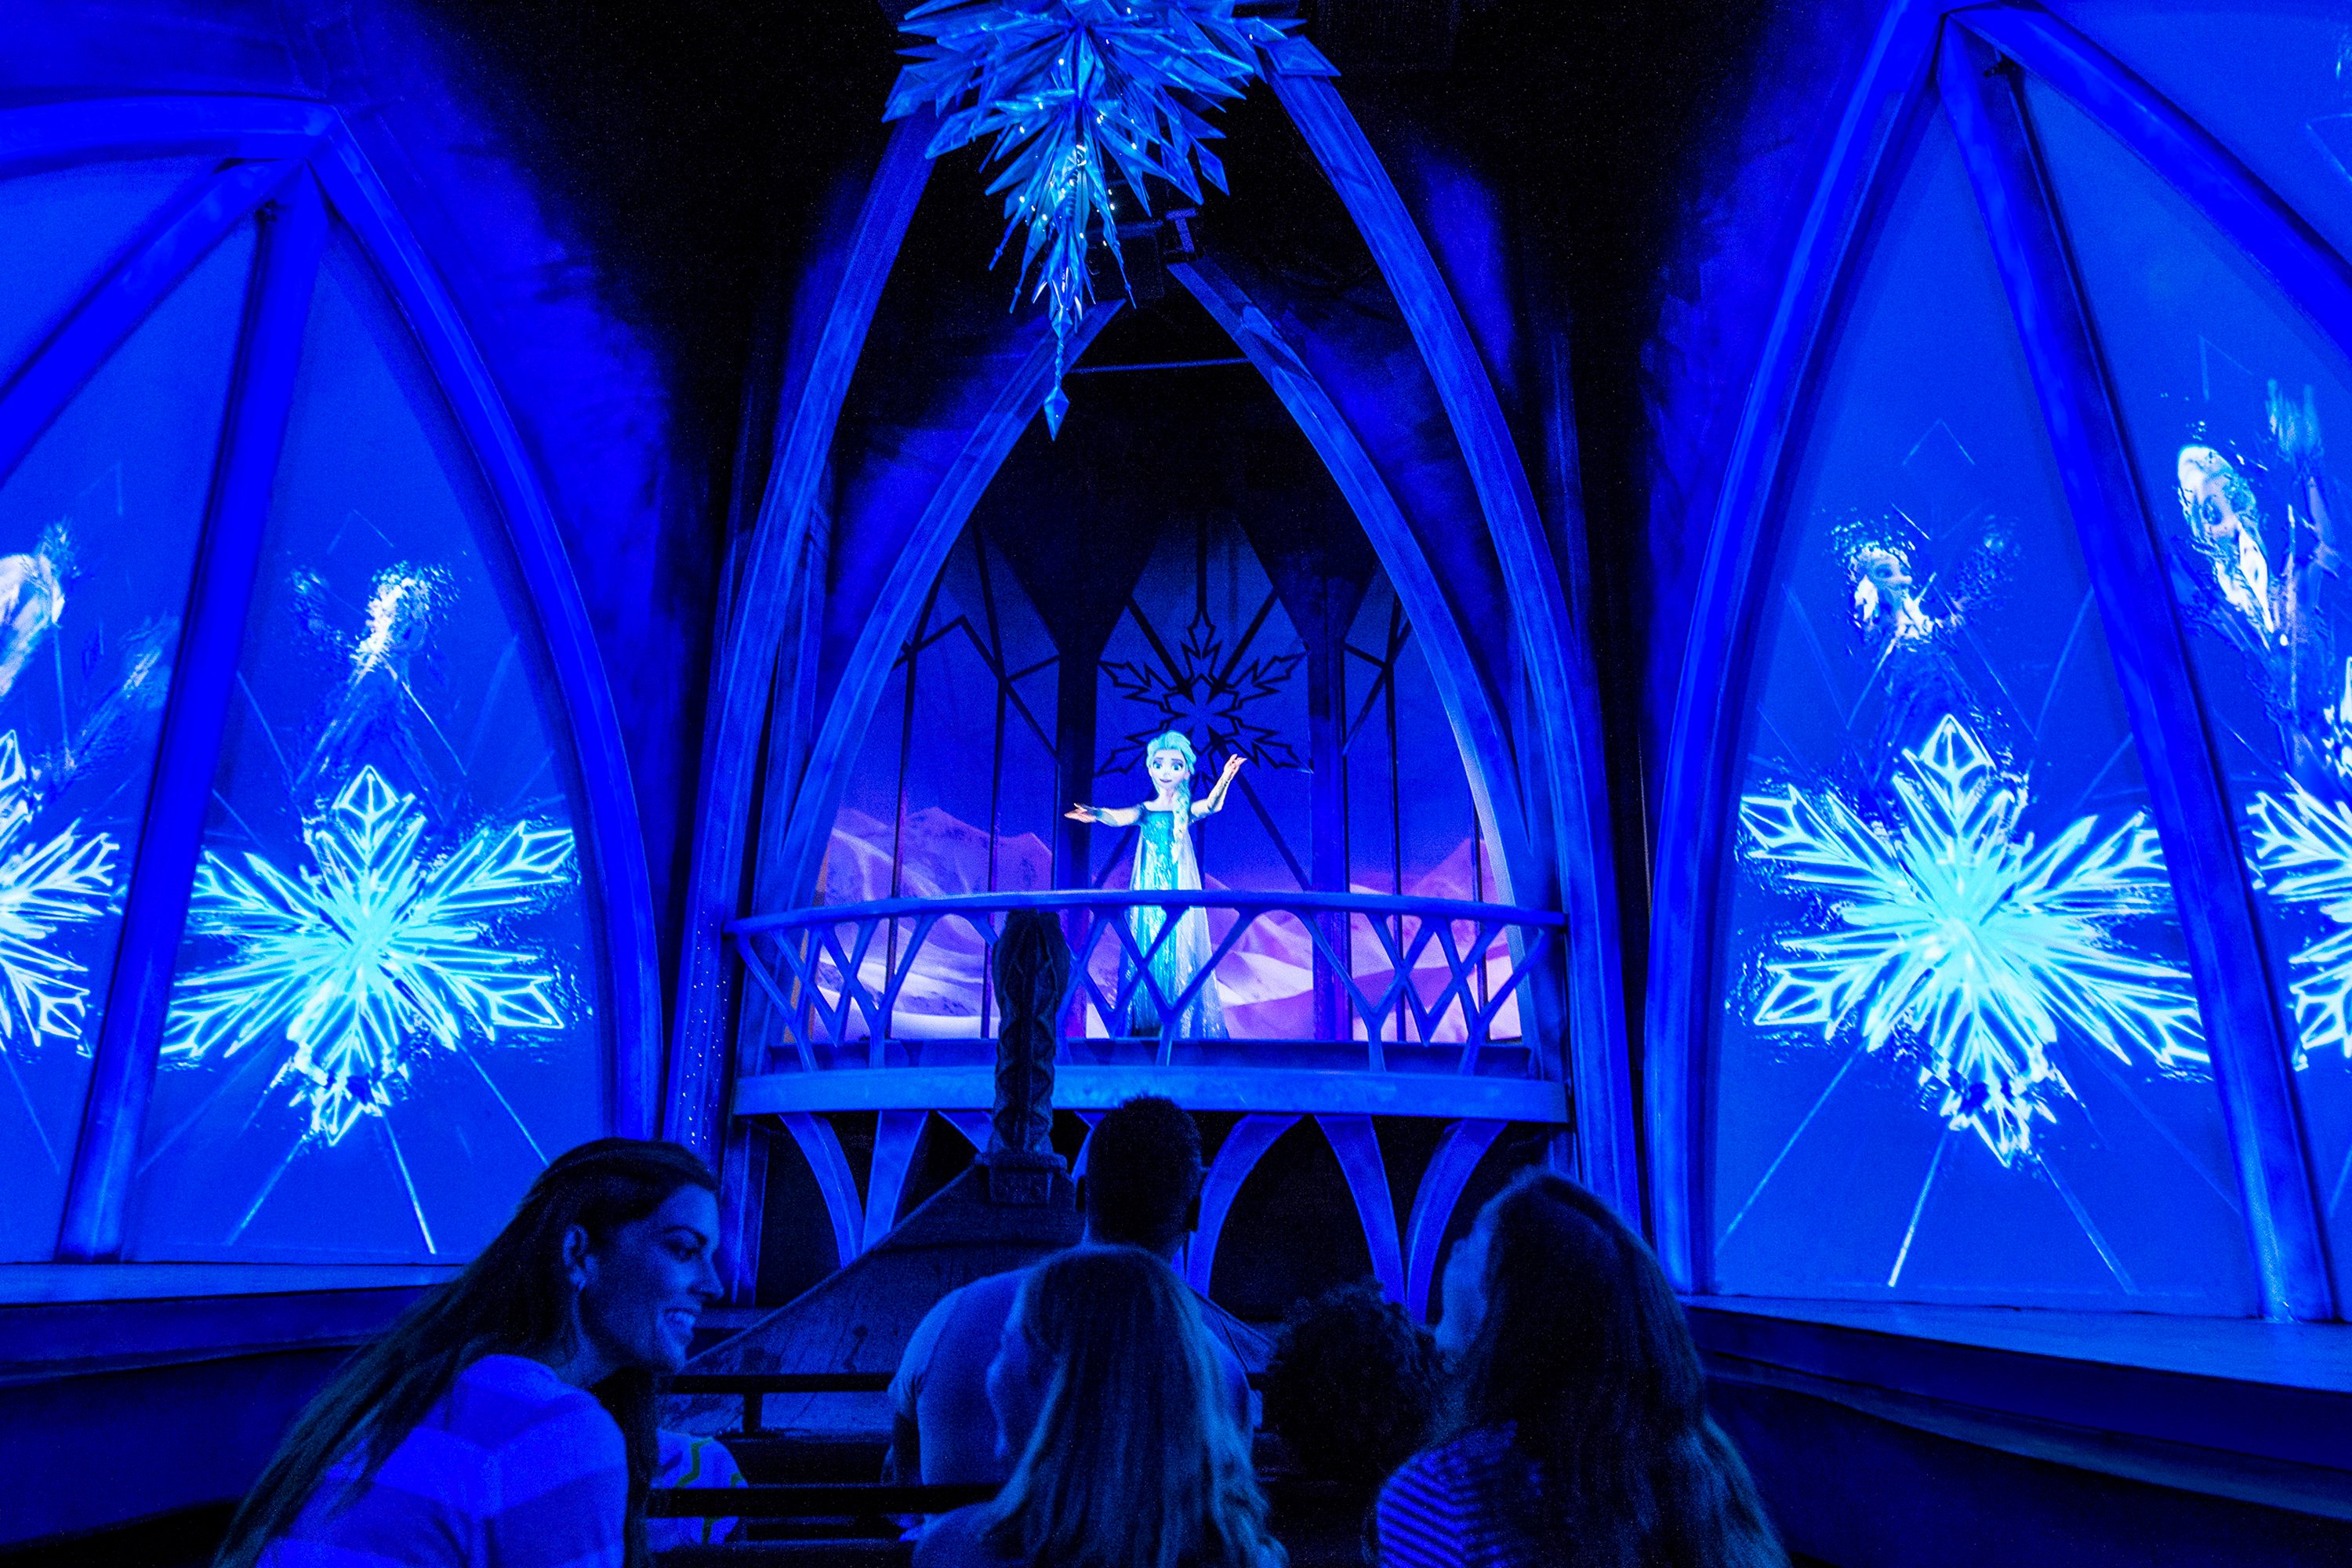 The Walt Disney World attraction based on 'Frozen,' titled 'Frozen Ever After'